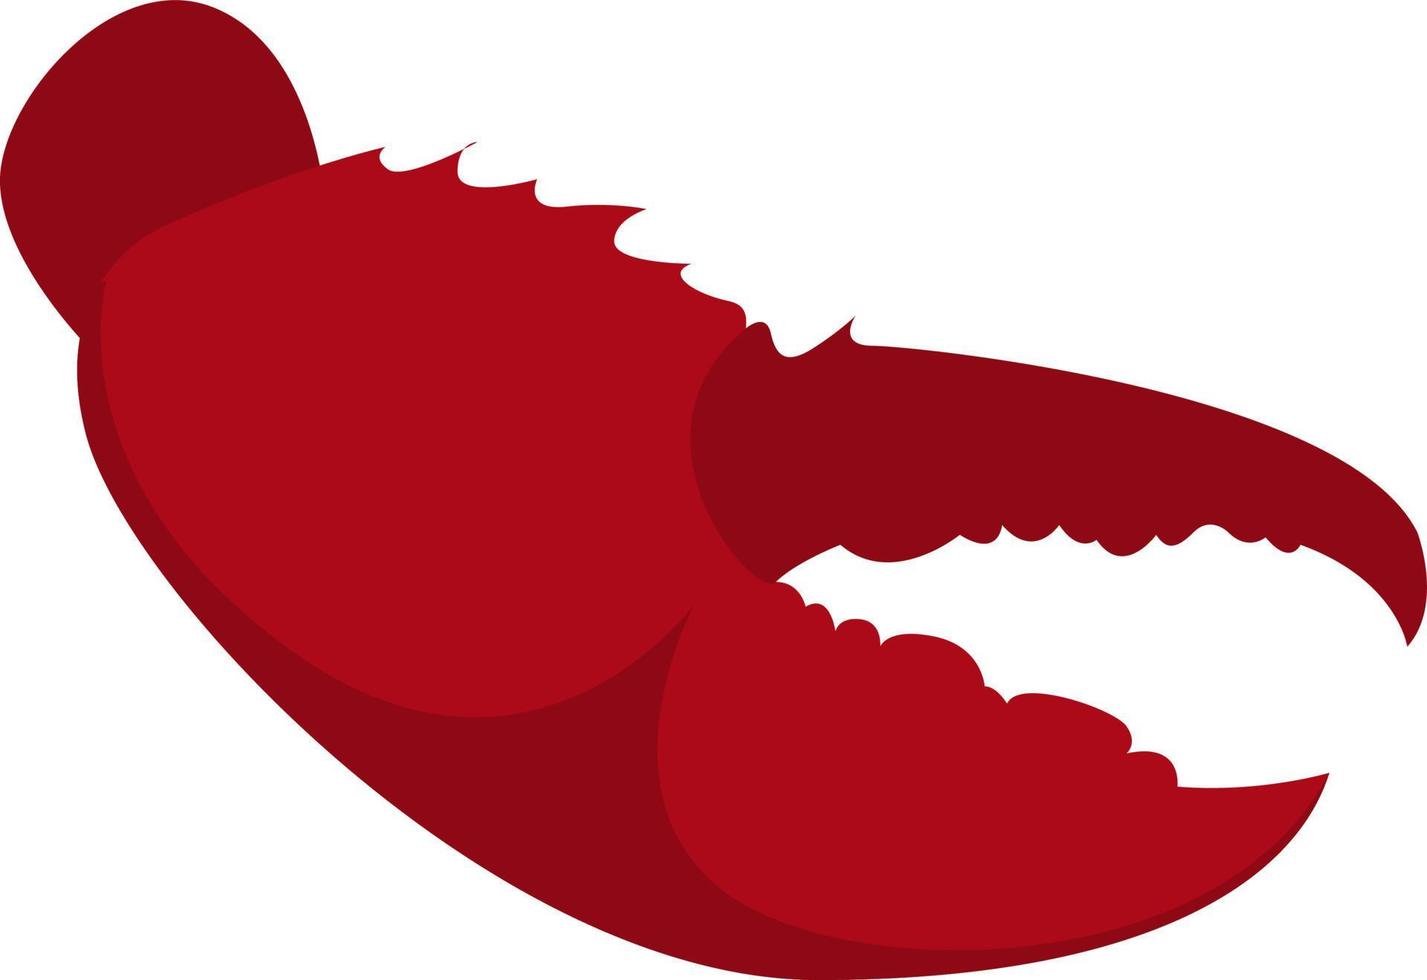 Lobster claw, illustration, vector on white background.